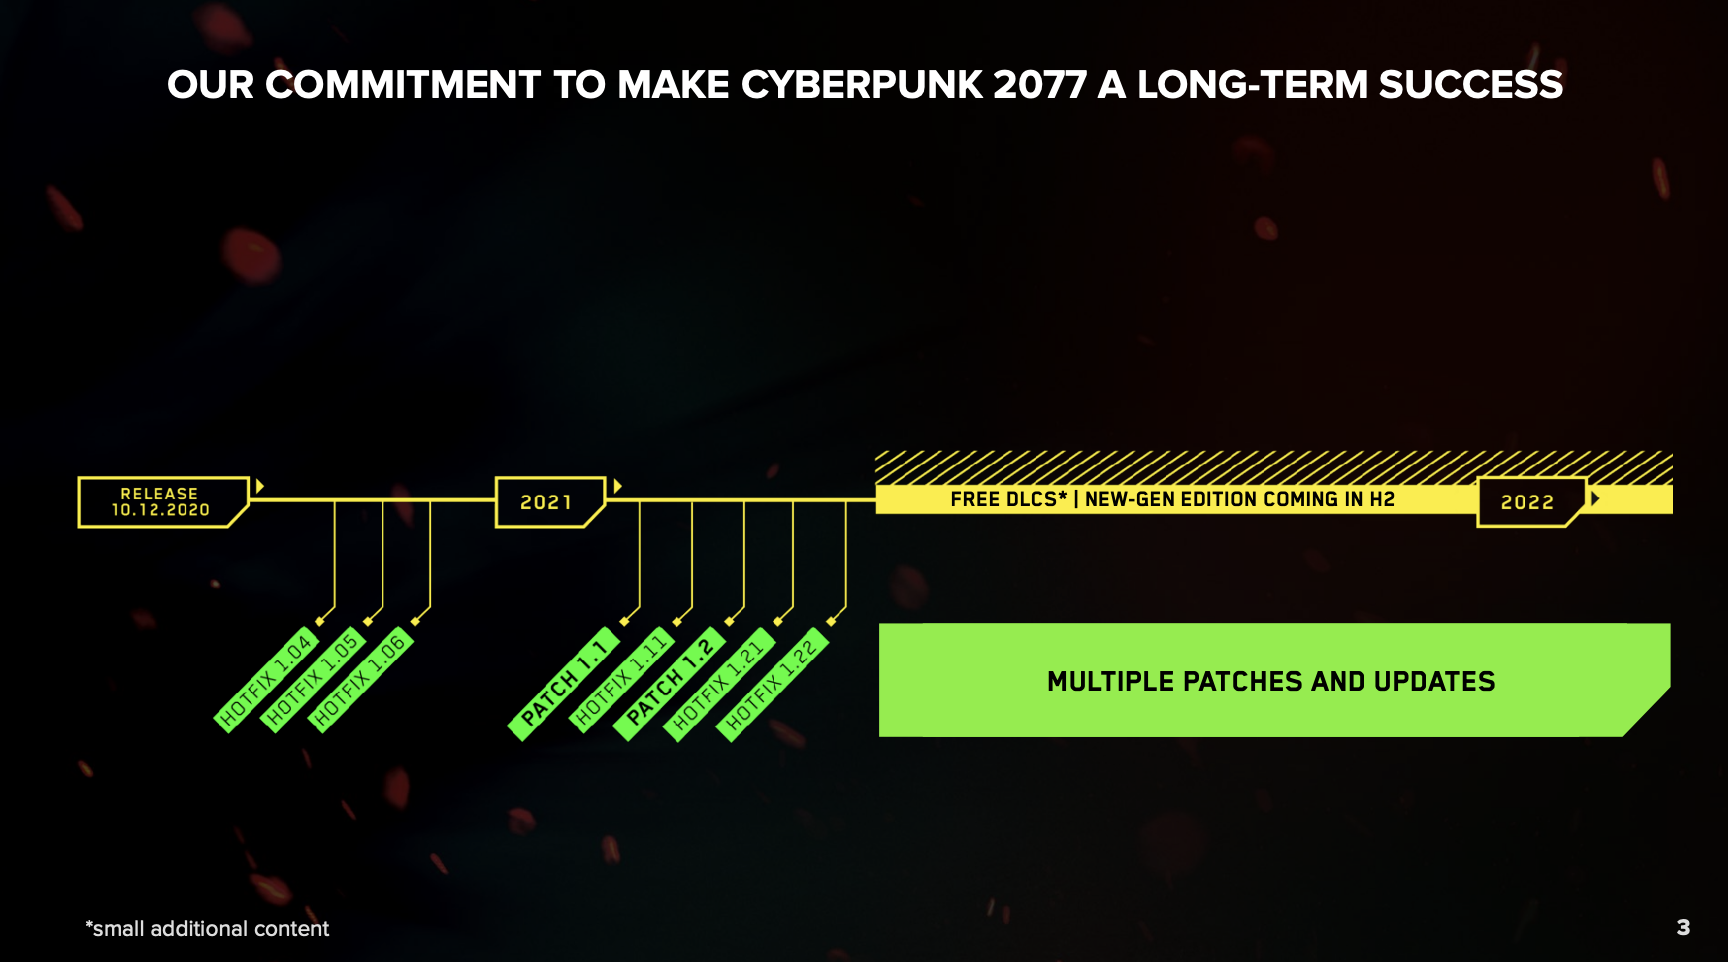 A slide that shows a timeline for updates to Cyberpunk 2077